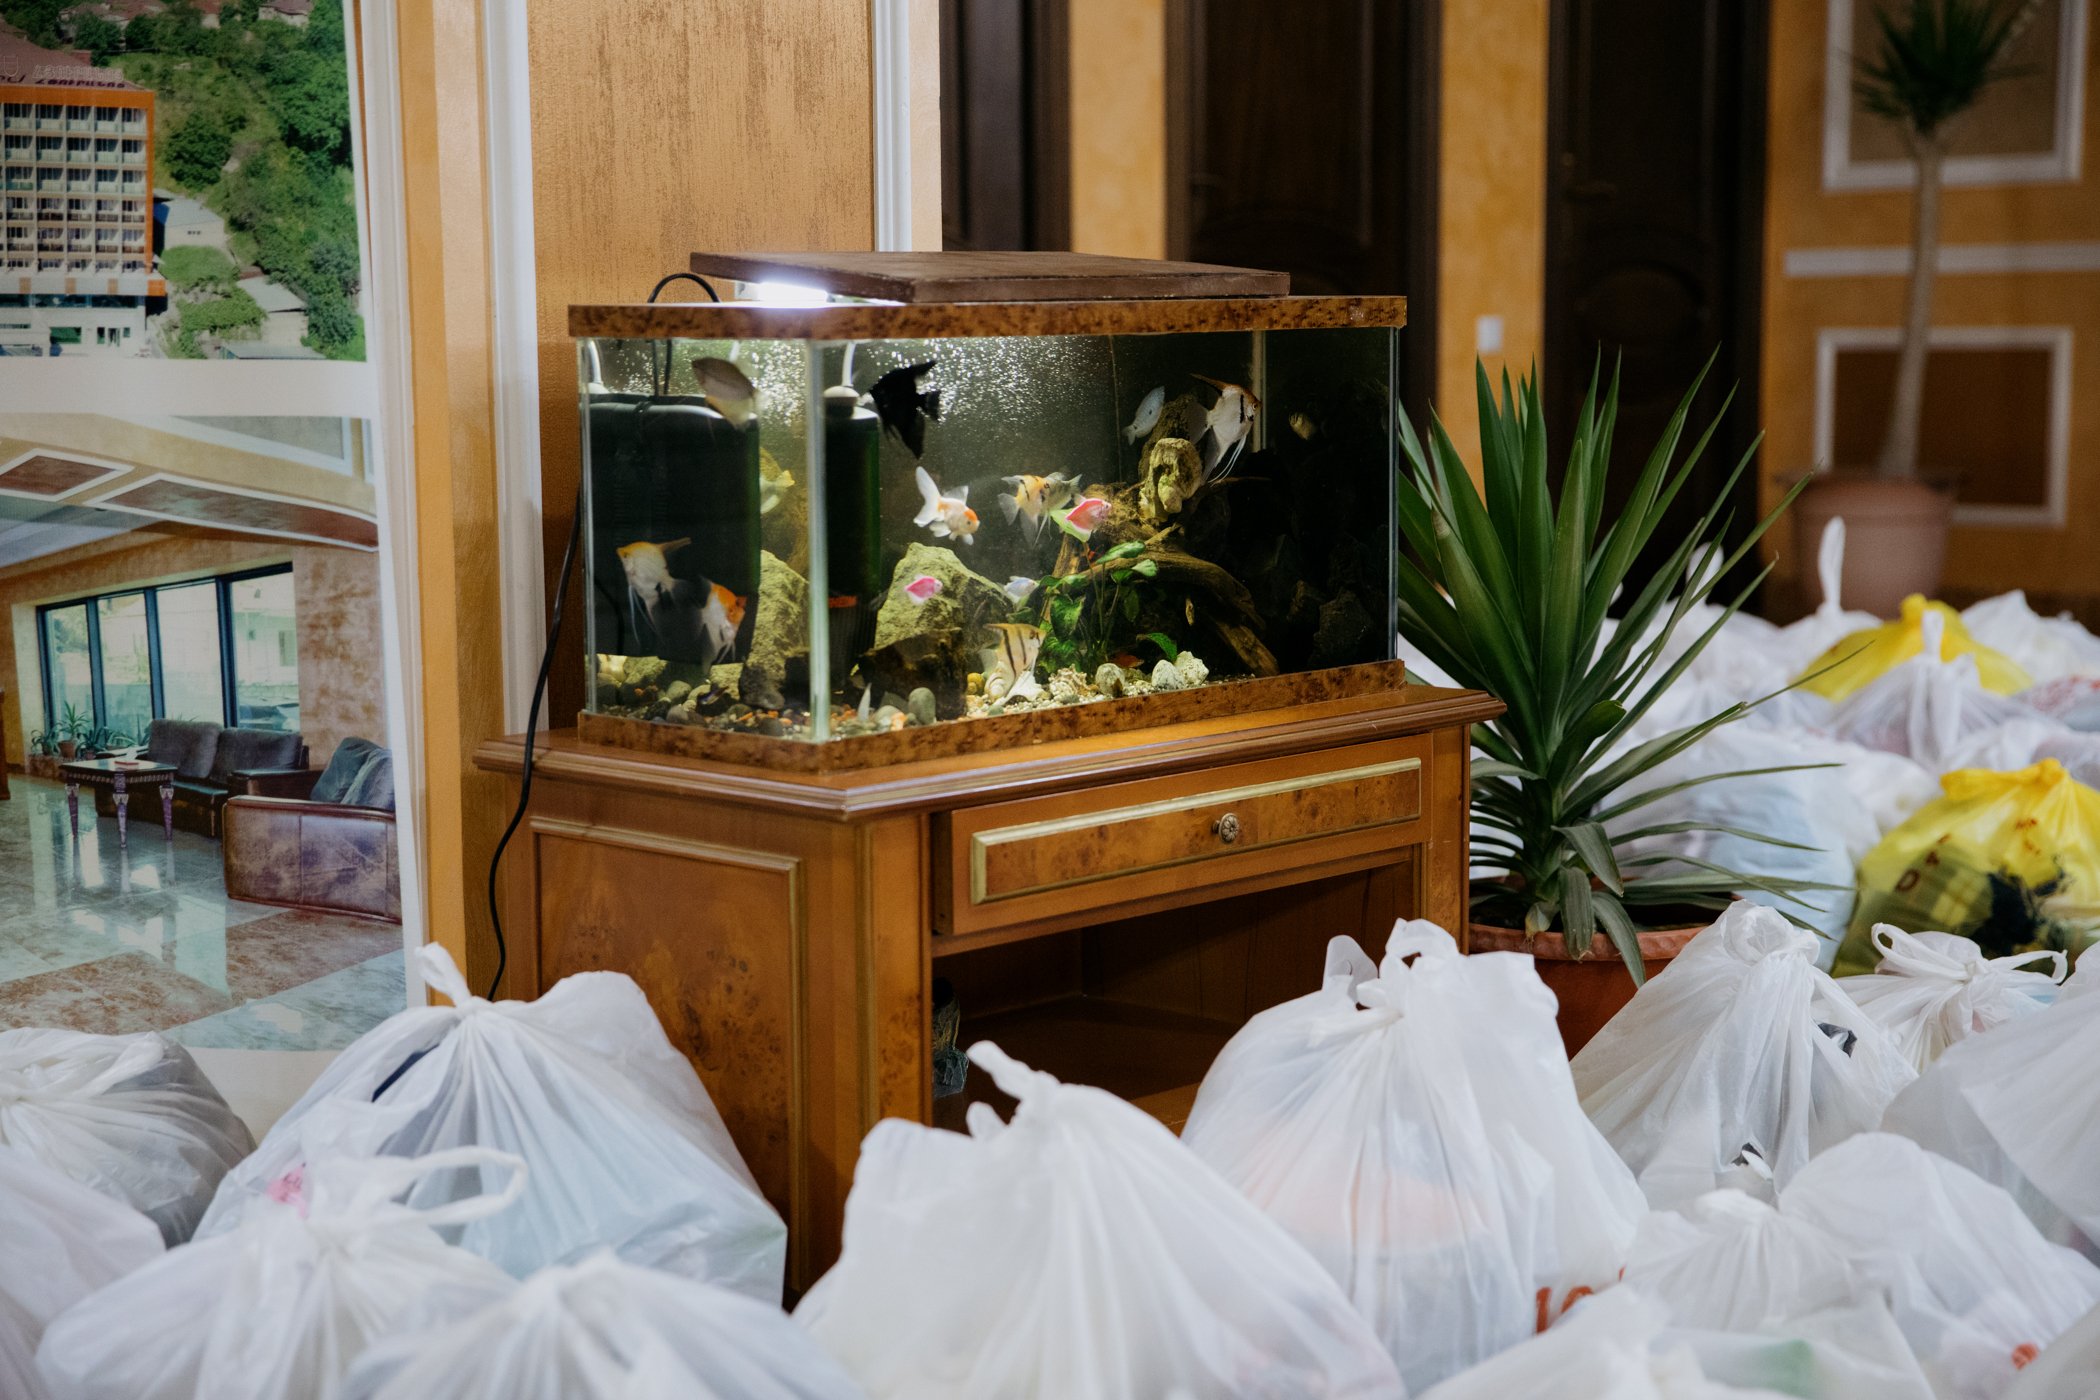  A fish tank in the reception of the Hotel Goris, surrounded by bags of aid provided by the Armenian government for people unable to return to Nagorno-Karabakh due to the closure of the Lachin Corridor. 